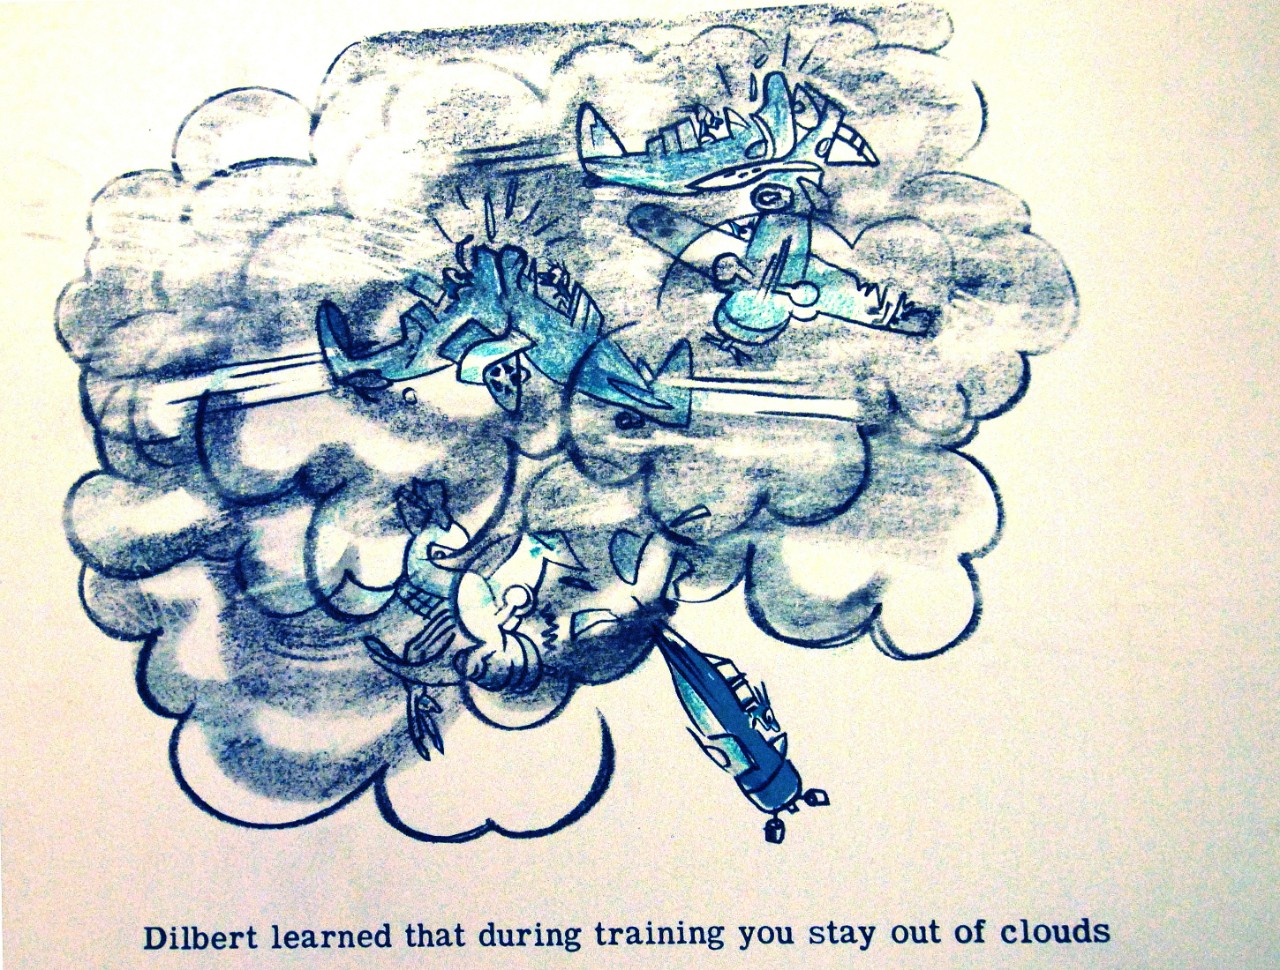 LC-Lot 8088-5: U.S. Naval Aviation Training Aids by U.S. Navy Training Division, circa 1943. Slide 246: “Dilbert learned that during training you stay out of the clouds.” Artwork by Lieutenant Commander Robert C. Osborn, USNR. Courtesy of the Library of Congress.